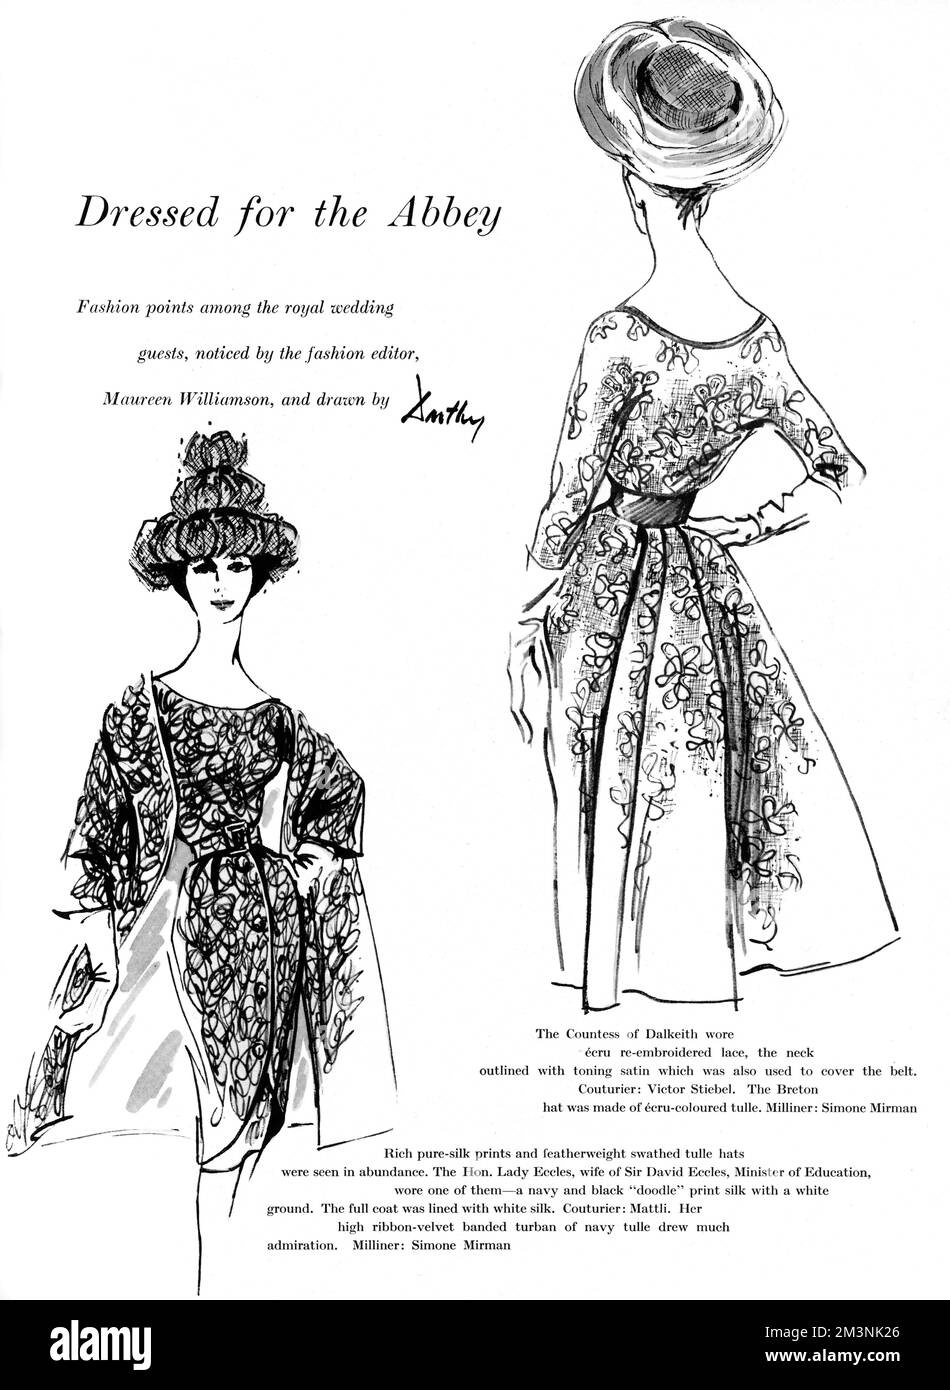 Fashions among the royal wedding guests at the marriage of Princess Margaret to Anthony Armstrong Jones (Earl Snowdon) on 6 May 1960 at Westminster Abbey.  On the left, the Hon, Lady Eccles, wife of Sir David Eccles, Minister for Education, wore a navy and black doodle print silk dress and duster coat lined with white silk by Mattli.  Her high ribbon velvet banded turban of navy tulle by Simone Mirman drew much admiration.  On the right, the Countess of Dalkeith wore an ecru re-embroidered lace dress, the neckline outlined with toning satin which was also used to cover the belt by Victor Stieb Stock Photo